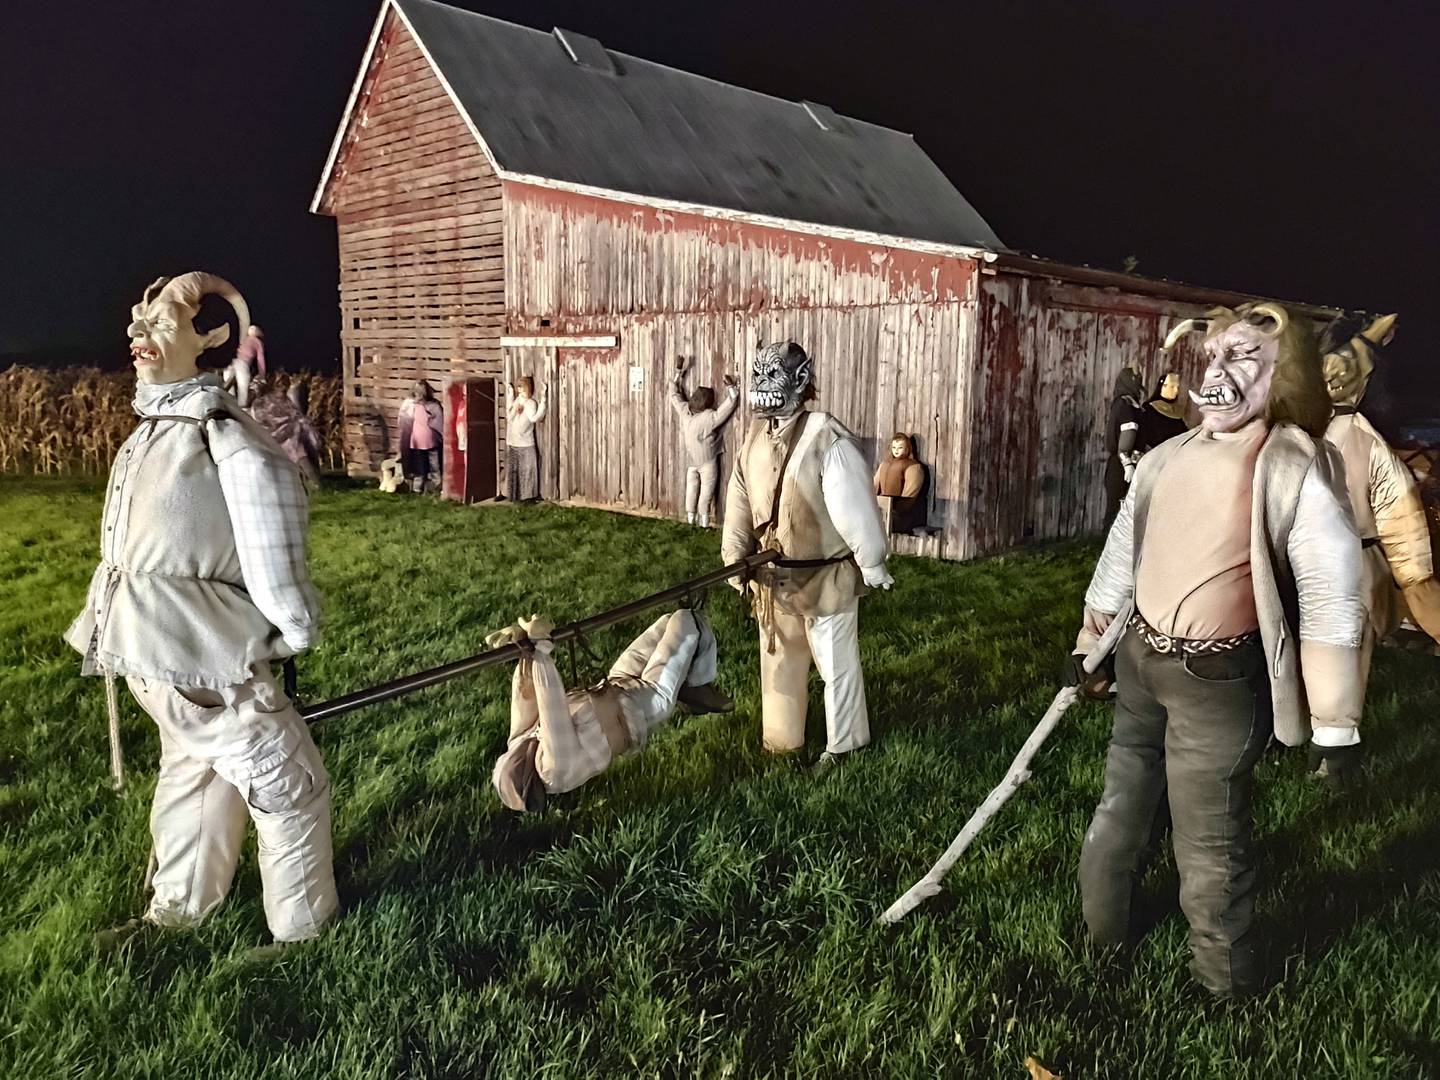 Hundreds of Halloween-themed mannequins ranging from monstrous to humorous are on display at Sturtevant Haunted Farm. The 2023 exhibit is open daily from sunrise to 10:30 p.m. throughout October at 16783 Highway 92, Walnut.